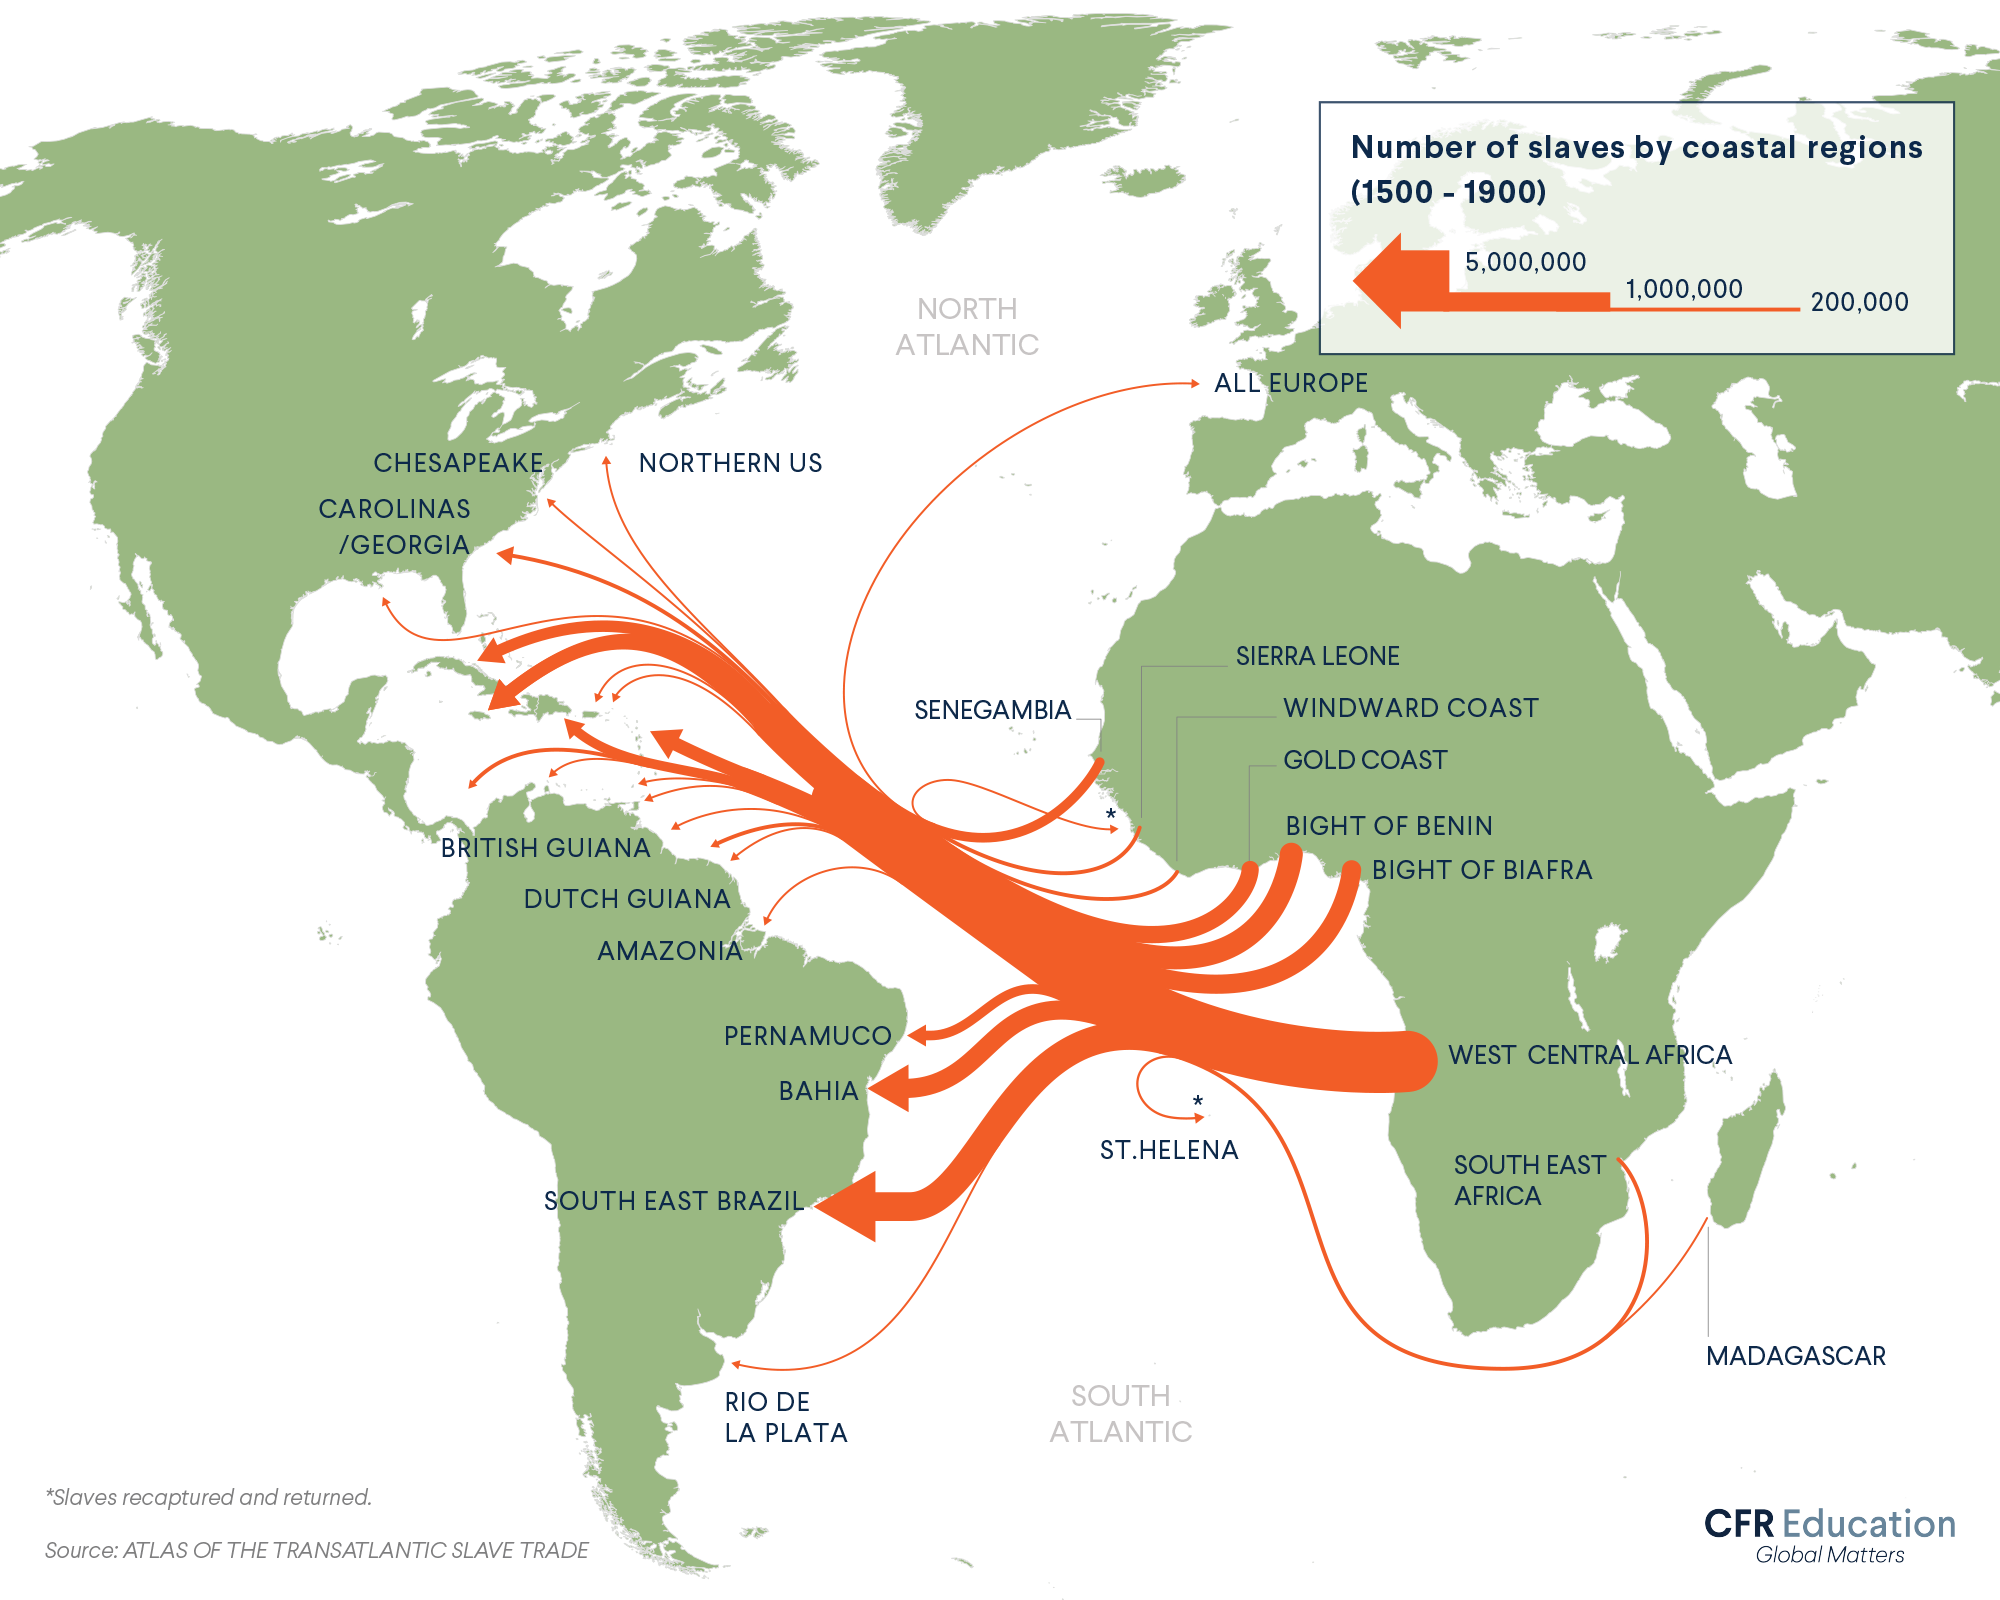 Map showing how millions of people were transported as slaves from Africa to the Americas in the years between 1500 and 1900. Source: Atlas of the Transatlantic Slave Trade. For more info contact us at cfr_education@cfr.org.